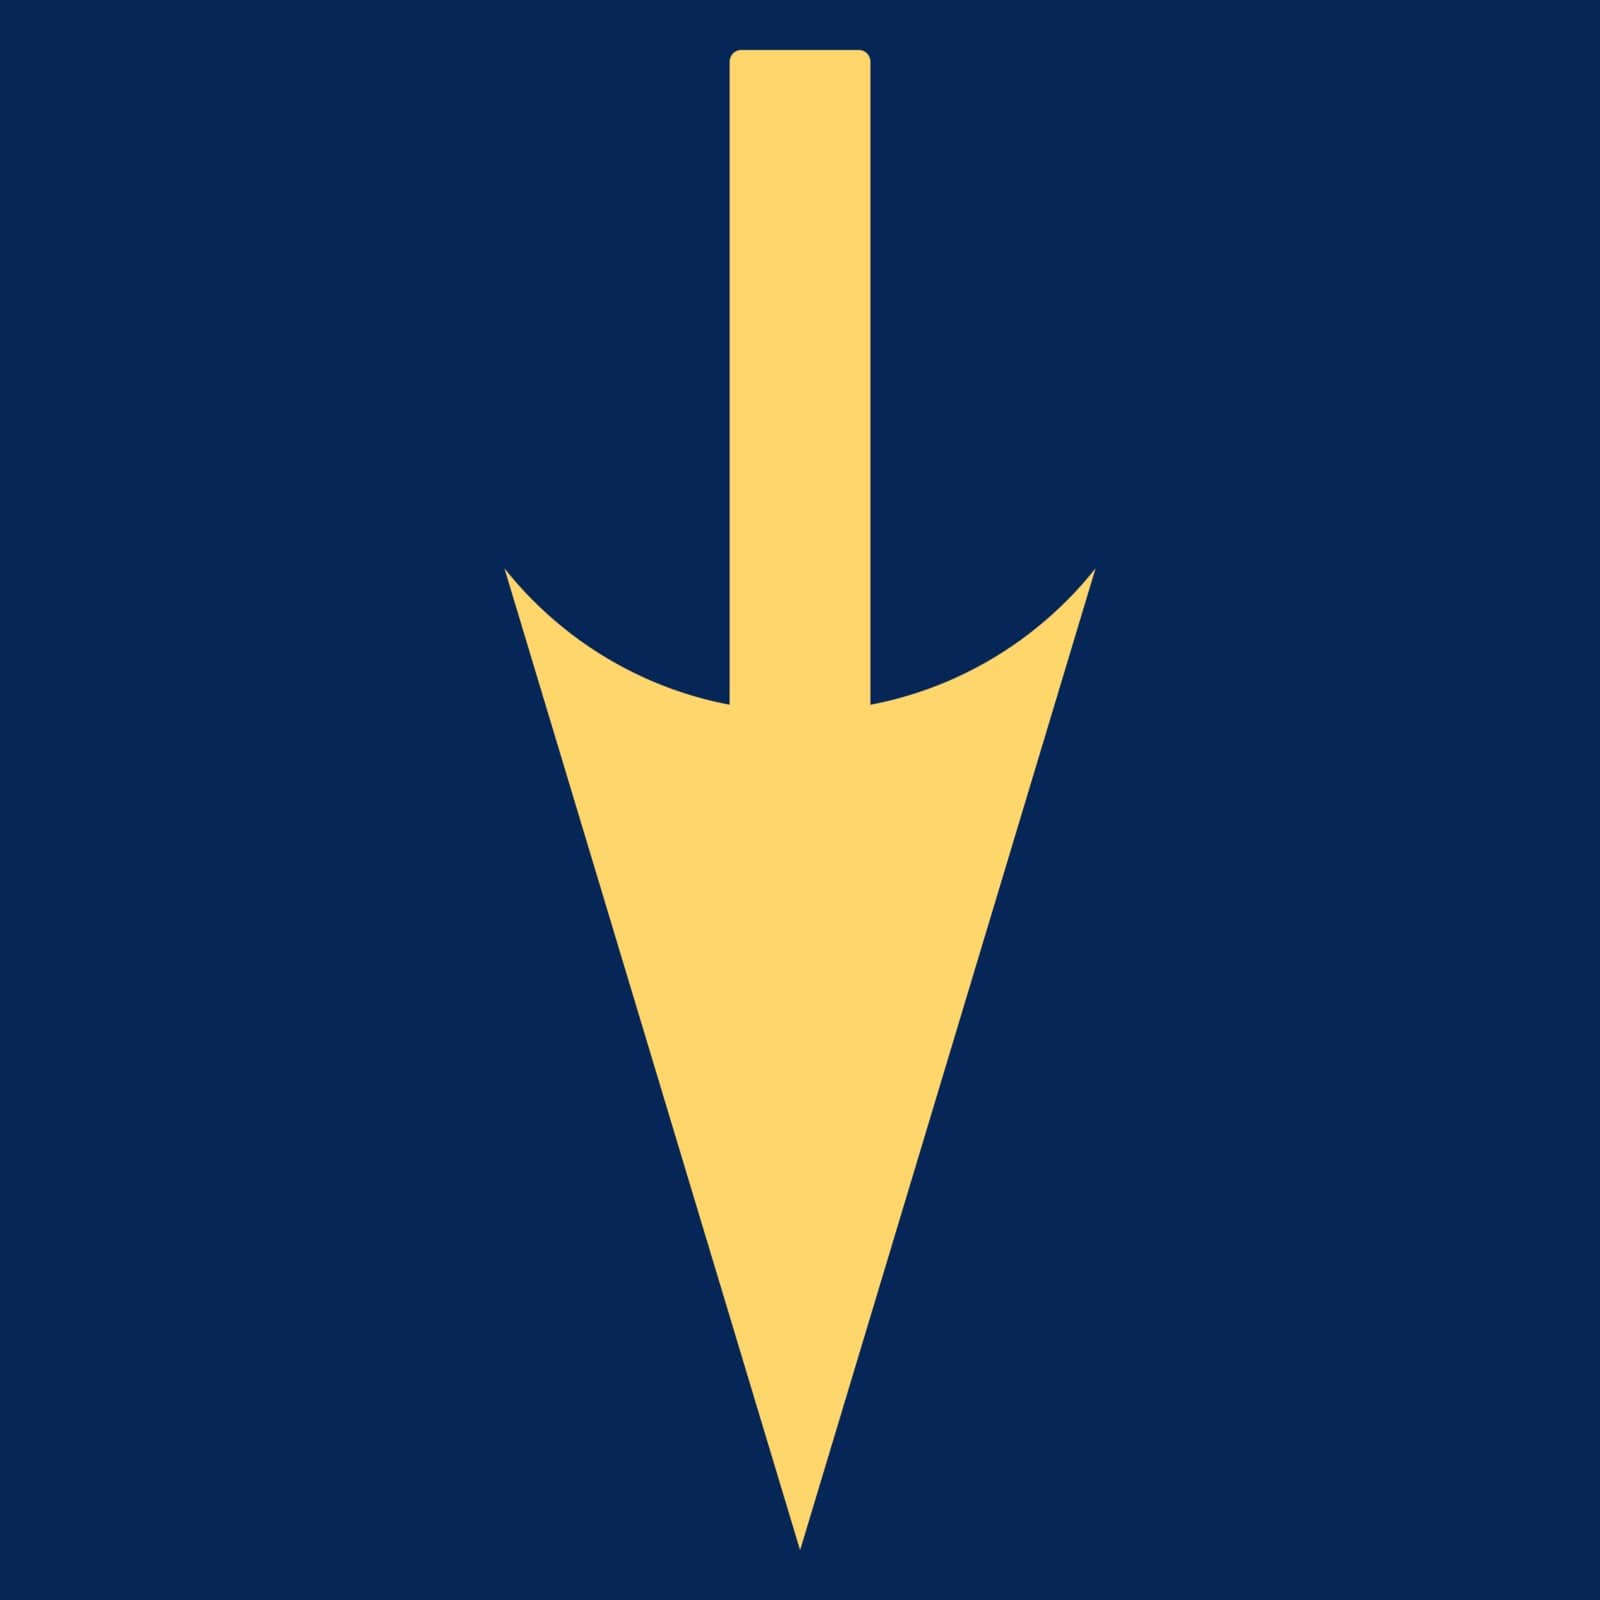 Sharp Down Arrow icon from Primitive Set. This isolated flat symbol is drawn with yellow color on a blue background.